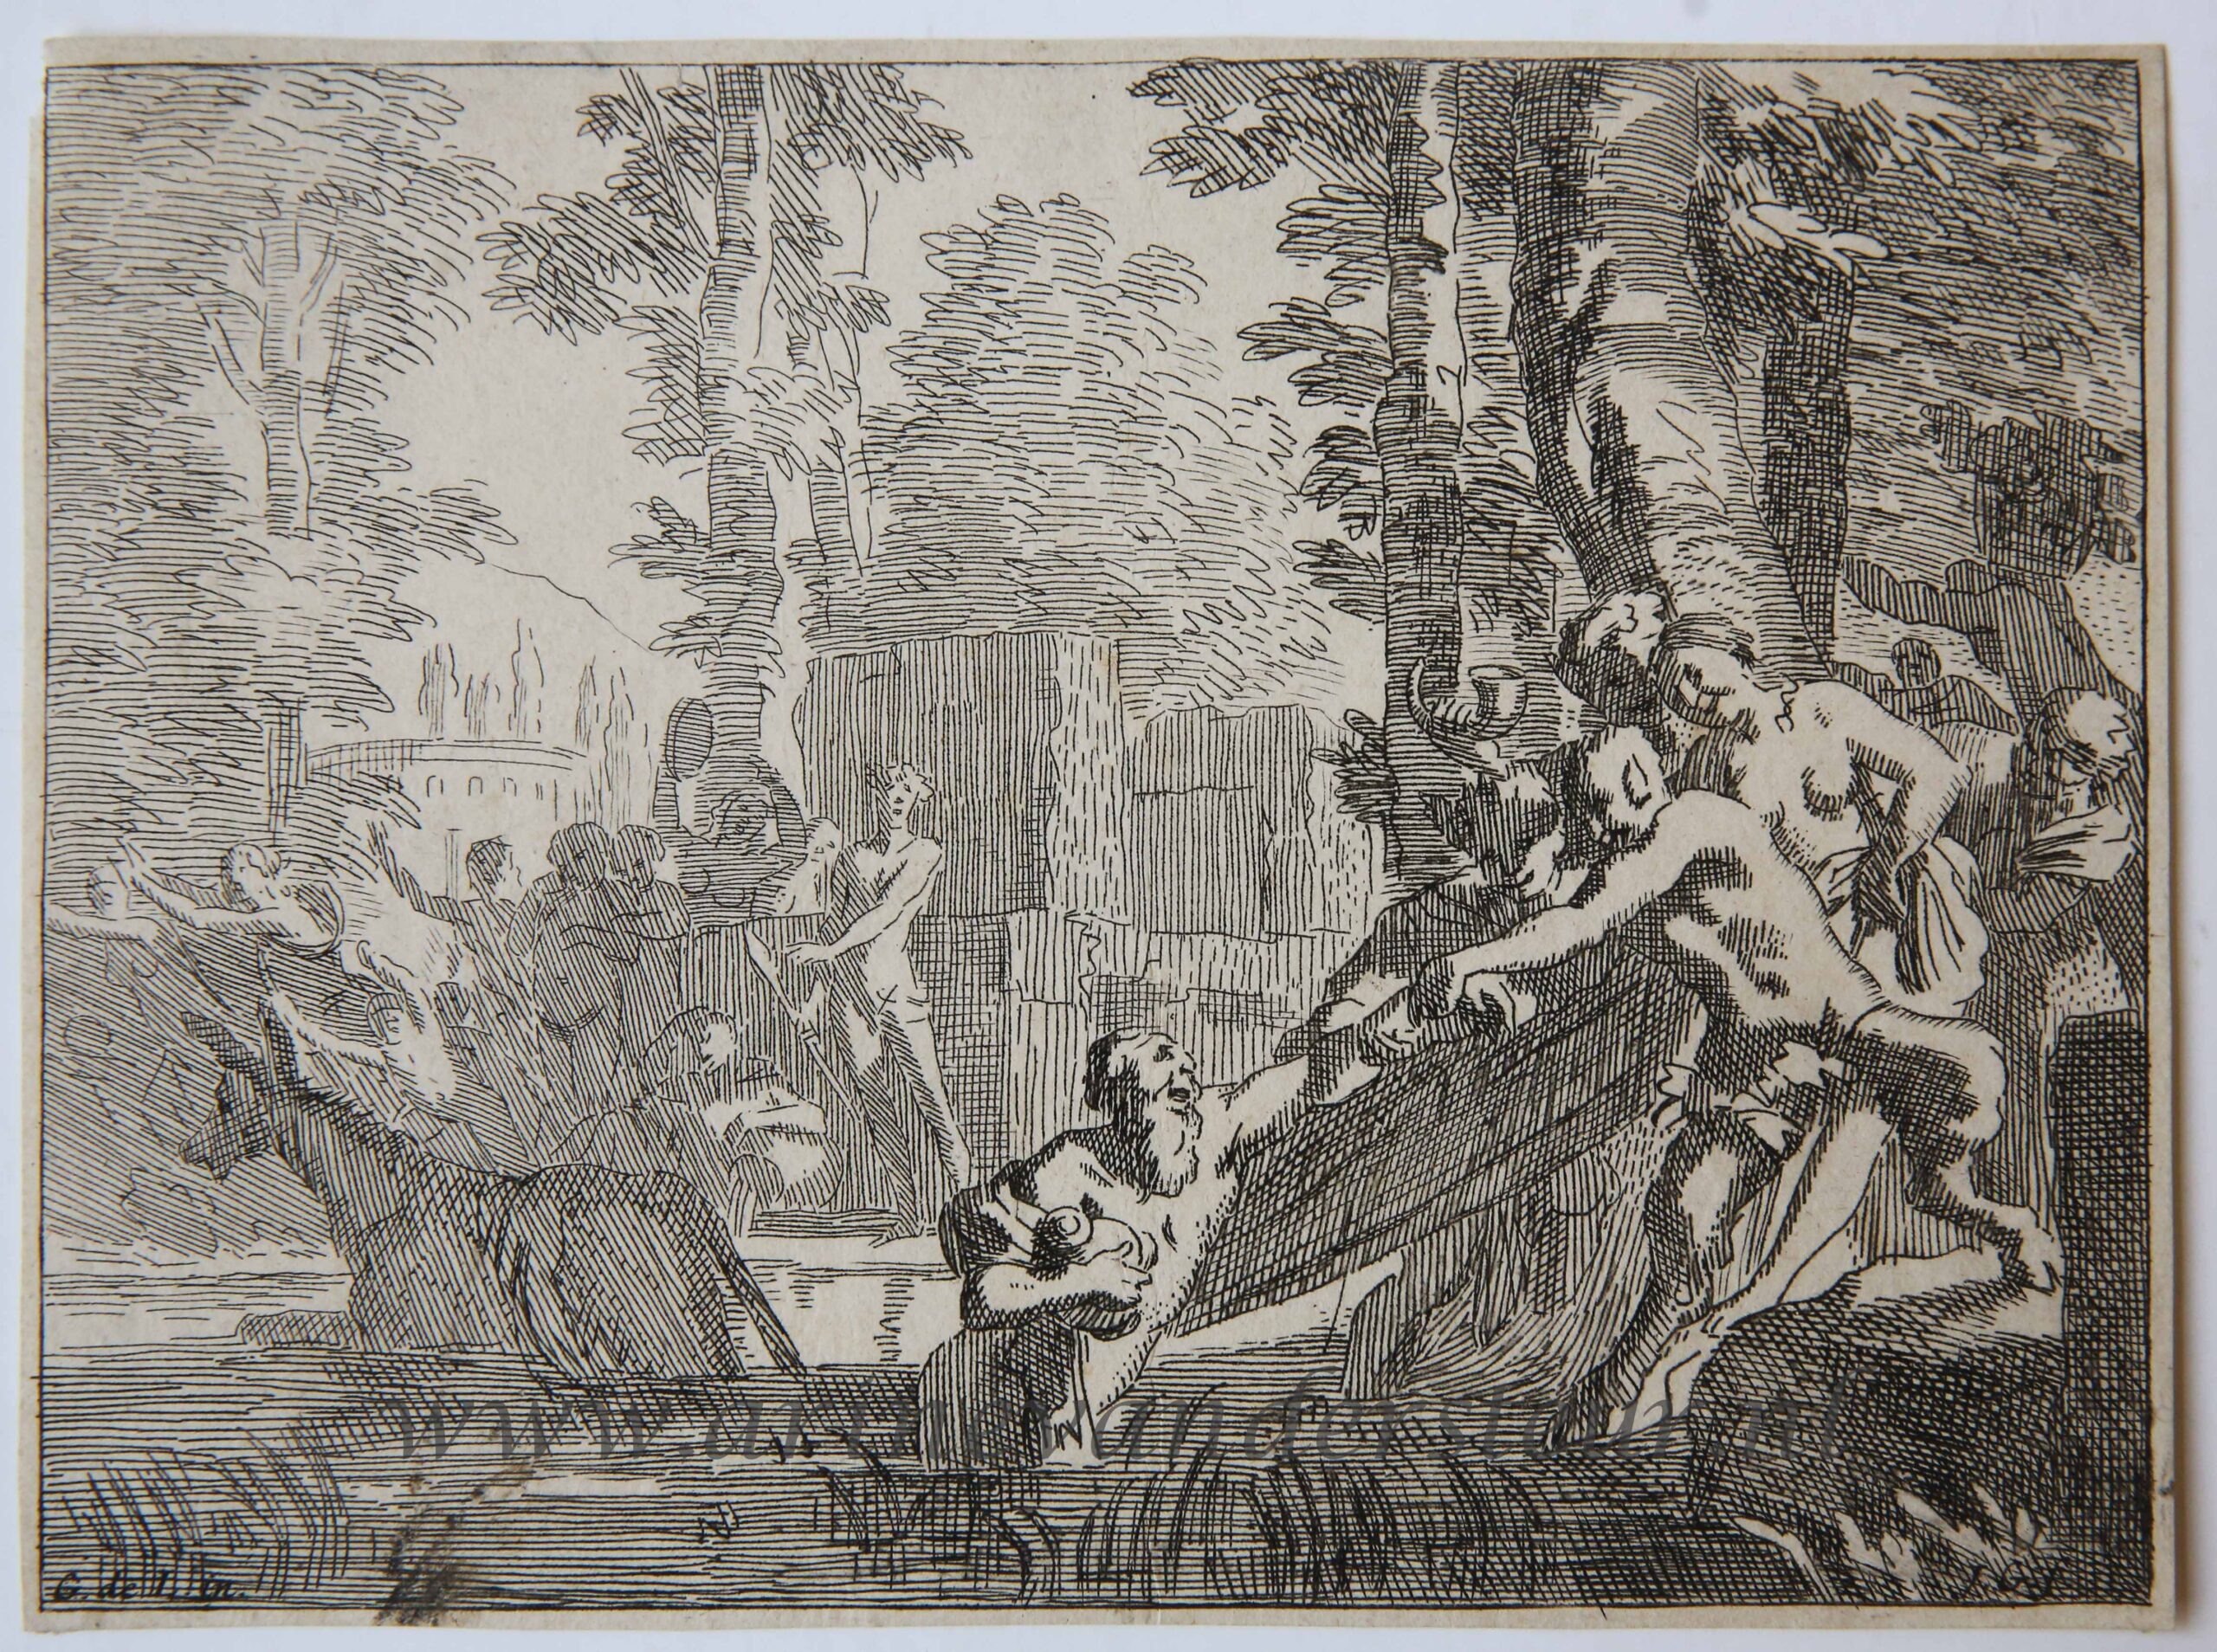 [Antique print, etching/ets] Silenus is pulled out of the water, published 1650-1750.